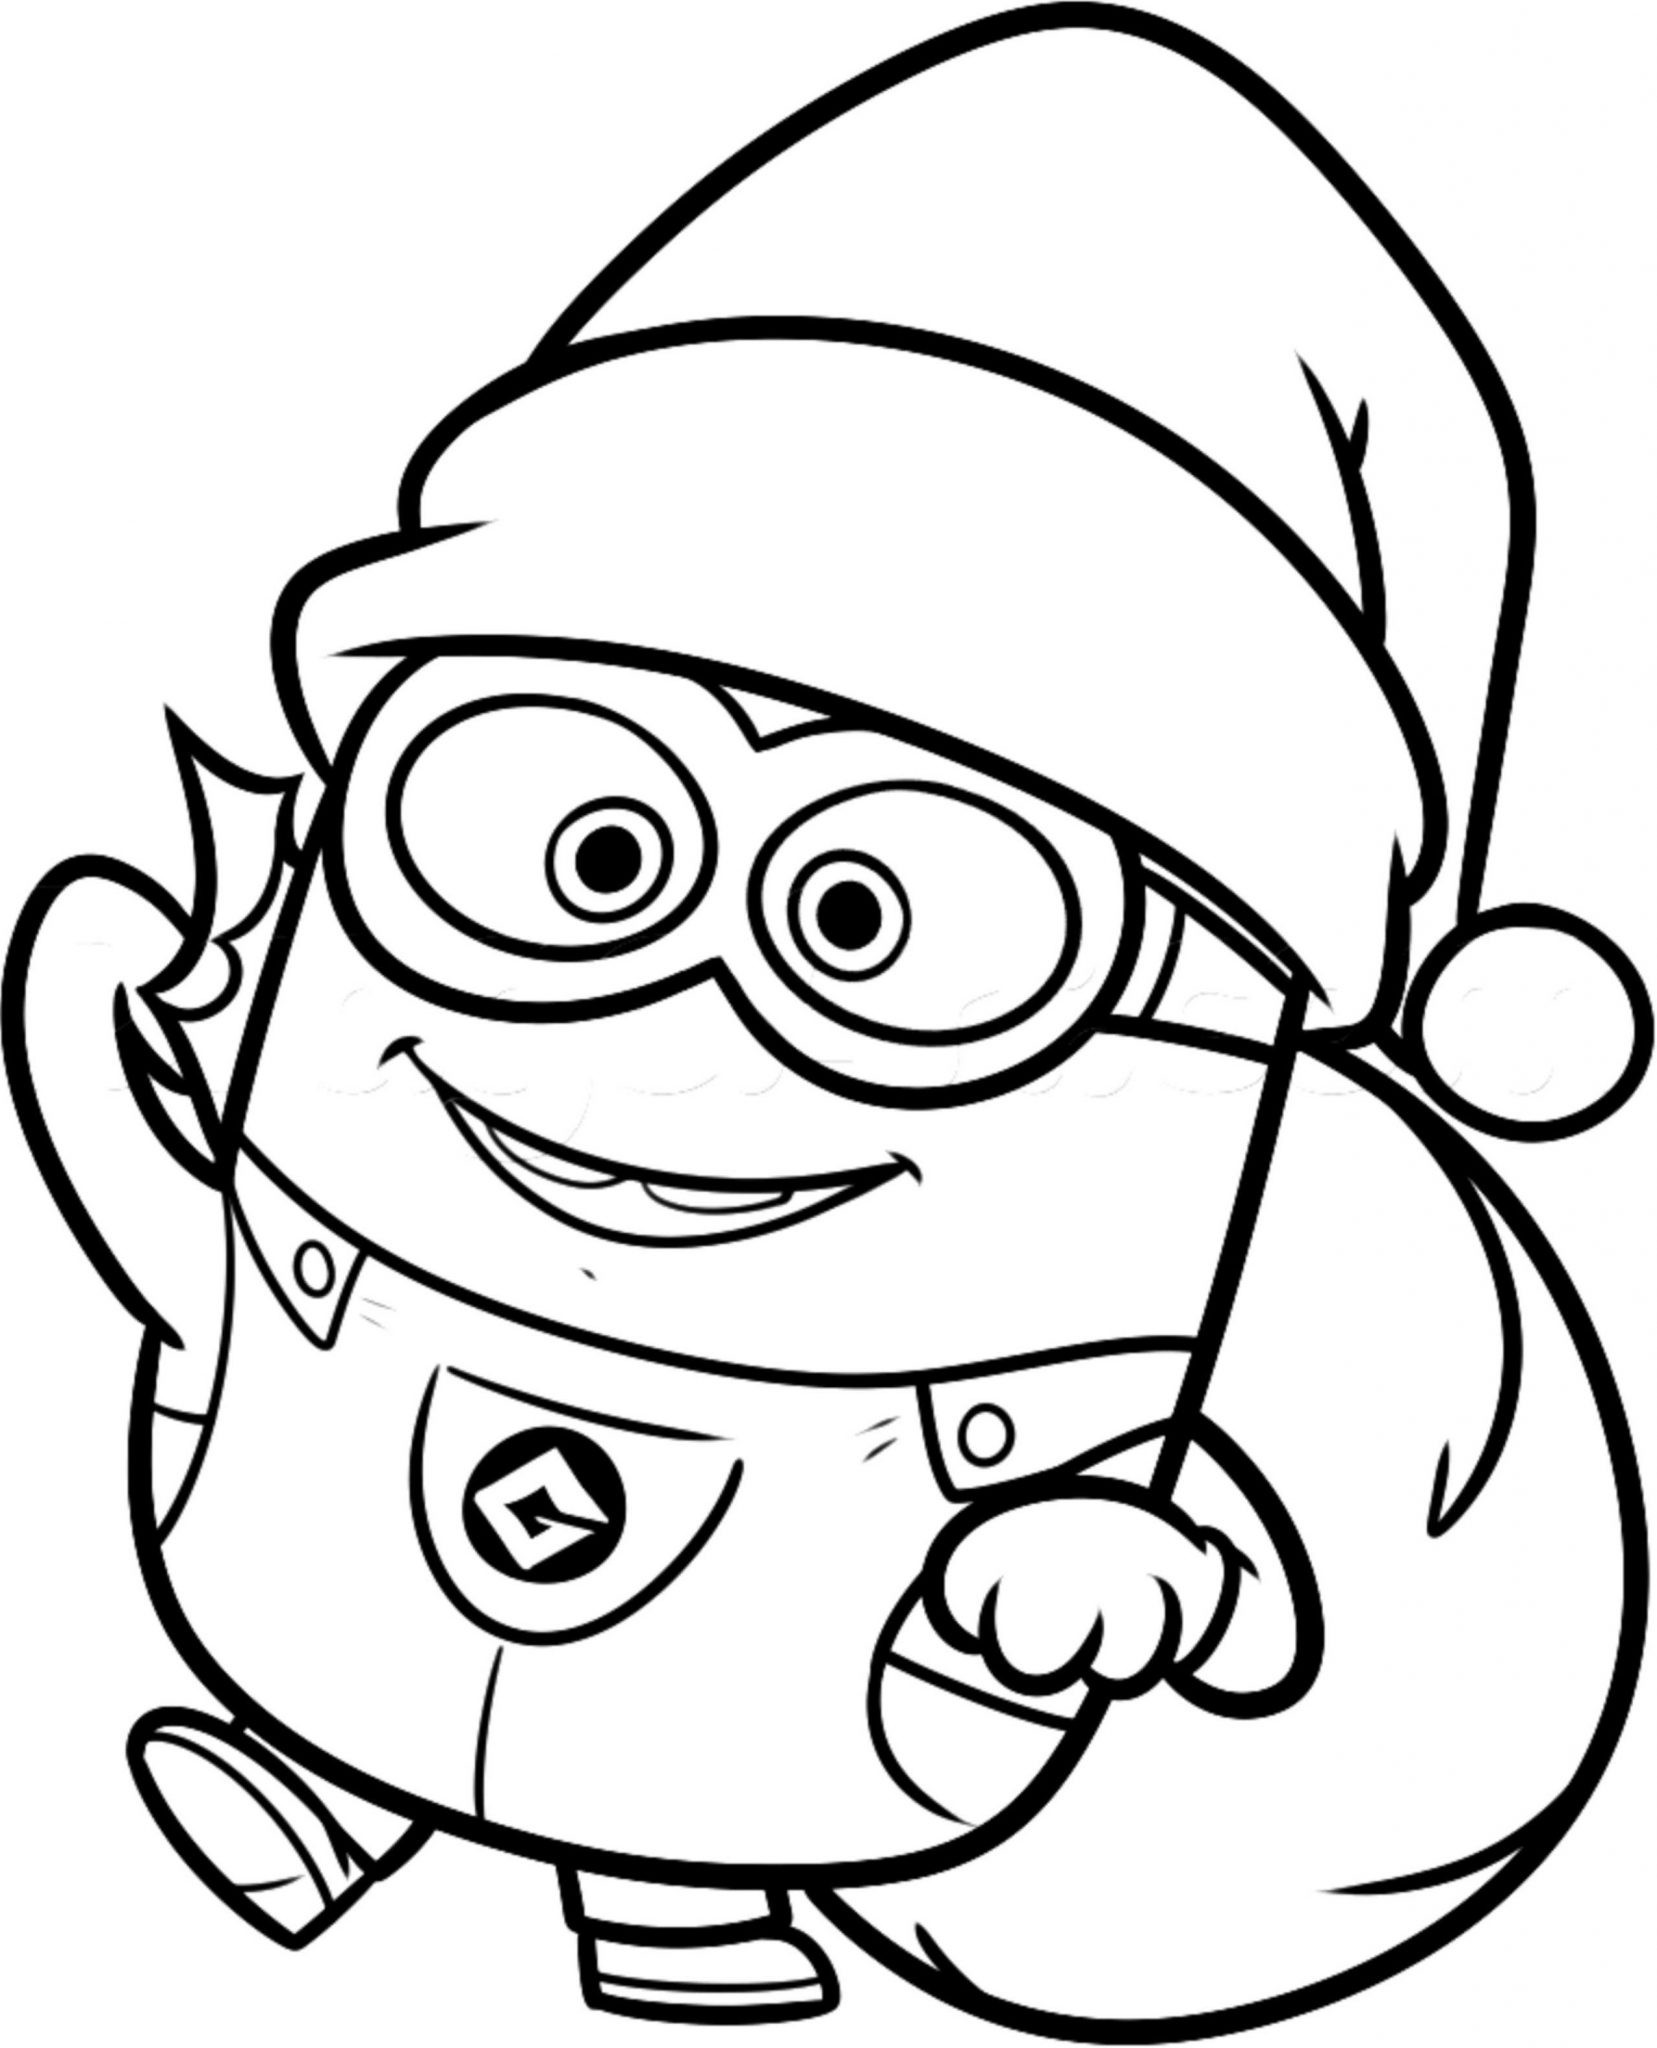 Printable Minions Coloring Pages
 Print & Download Minion Coloring Pages for Kids to Have